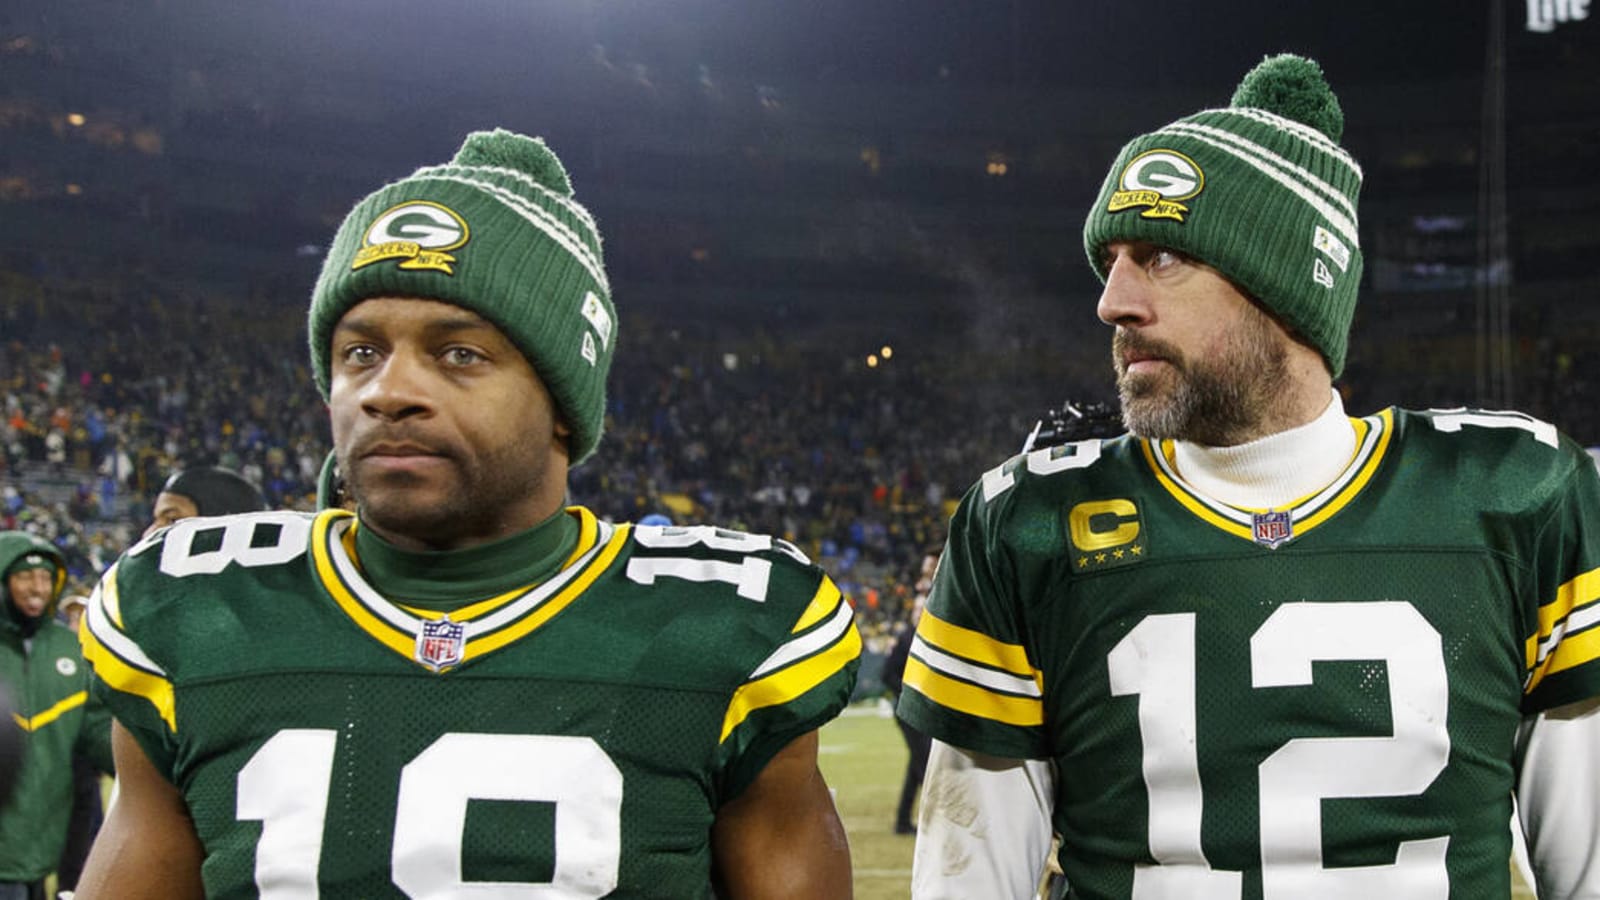 Did Packers' Rodgers hint at retirement after loss to Lions?